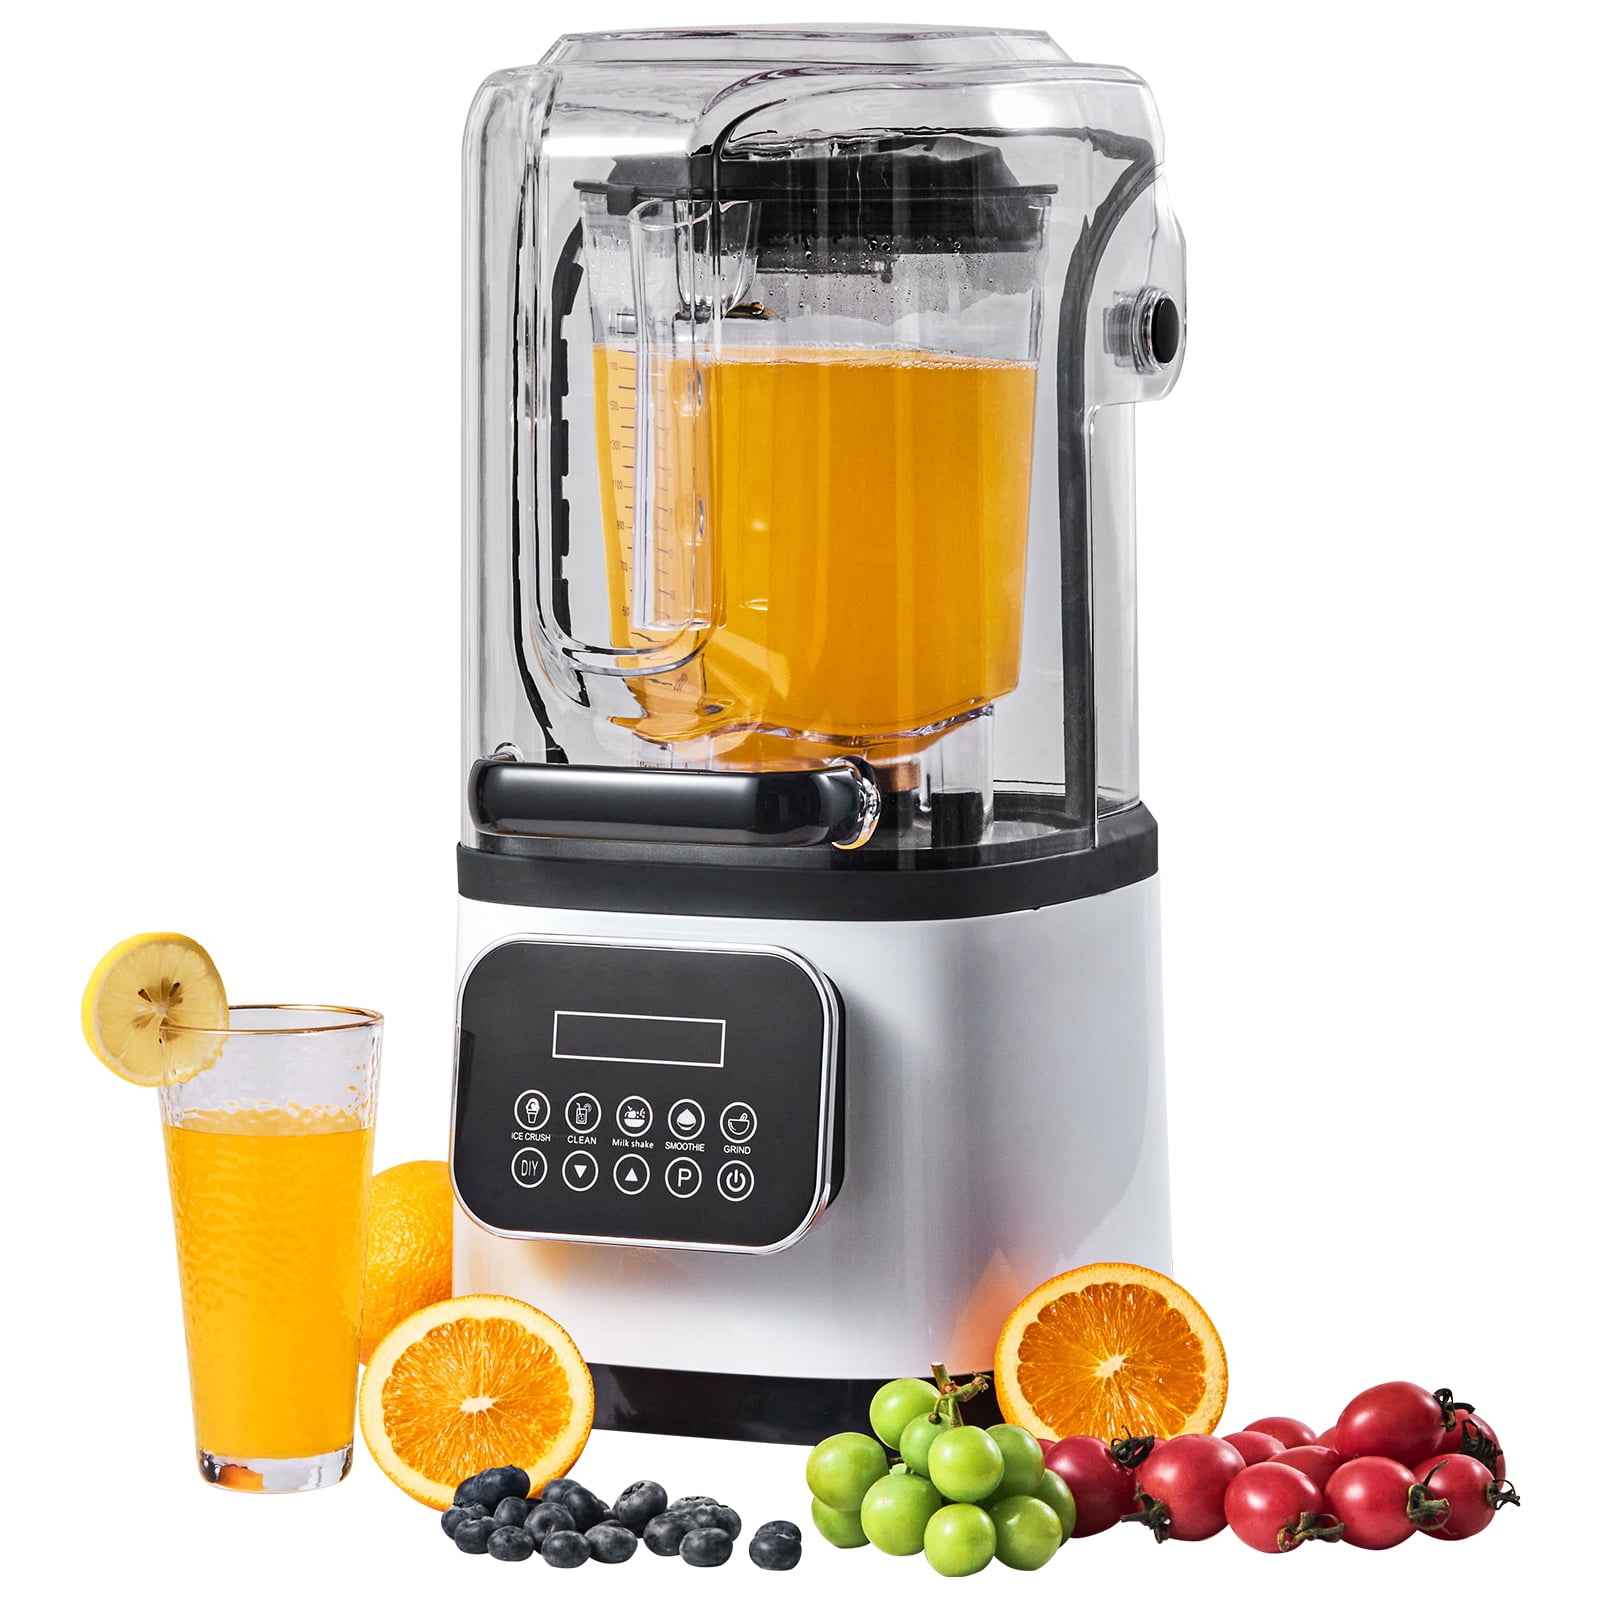 Blendtec Blenders for Professional Quality Smoothies – FroCup